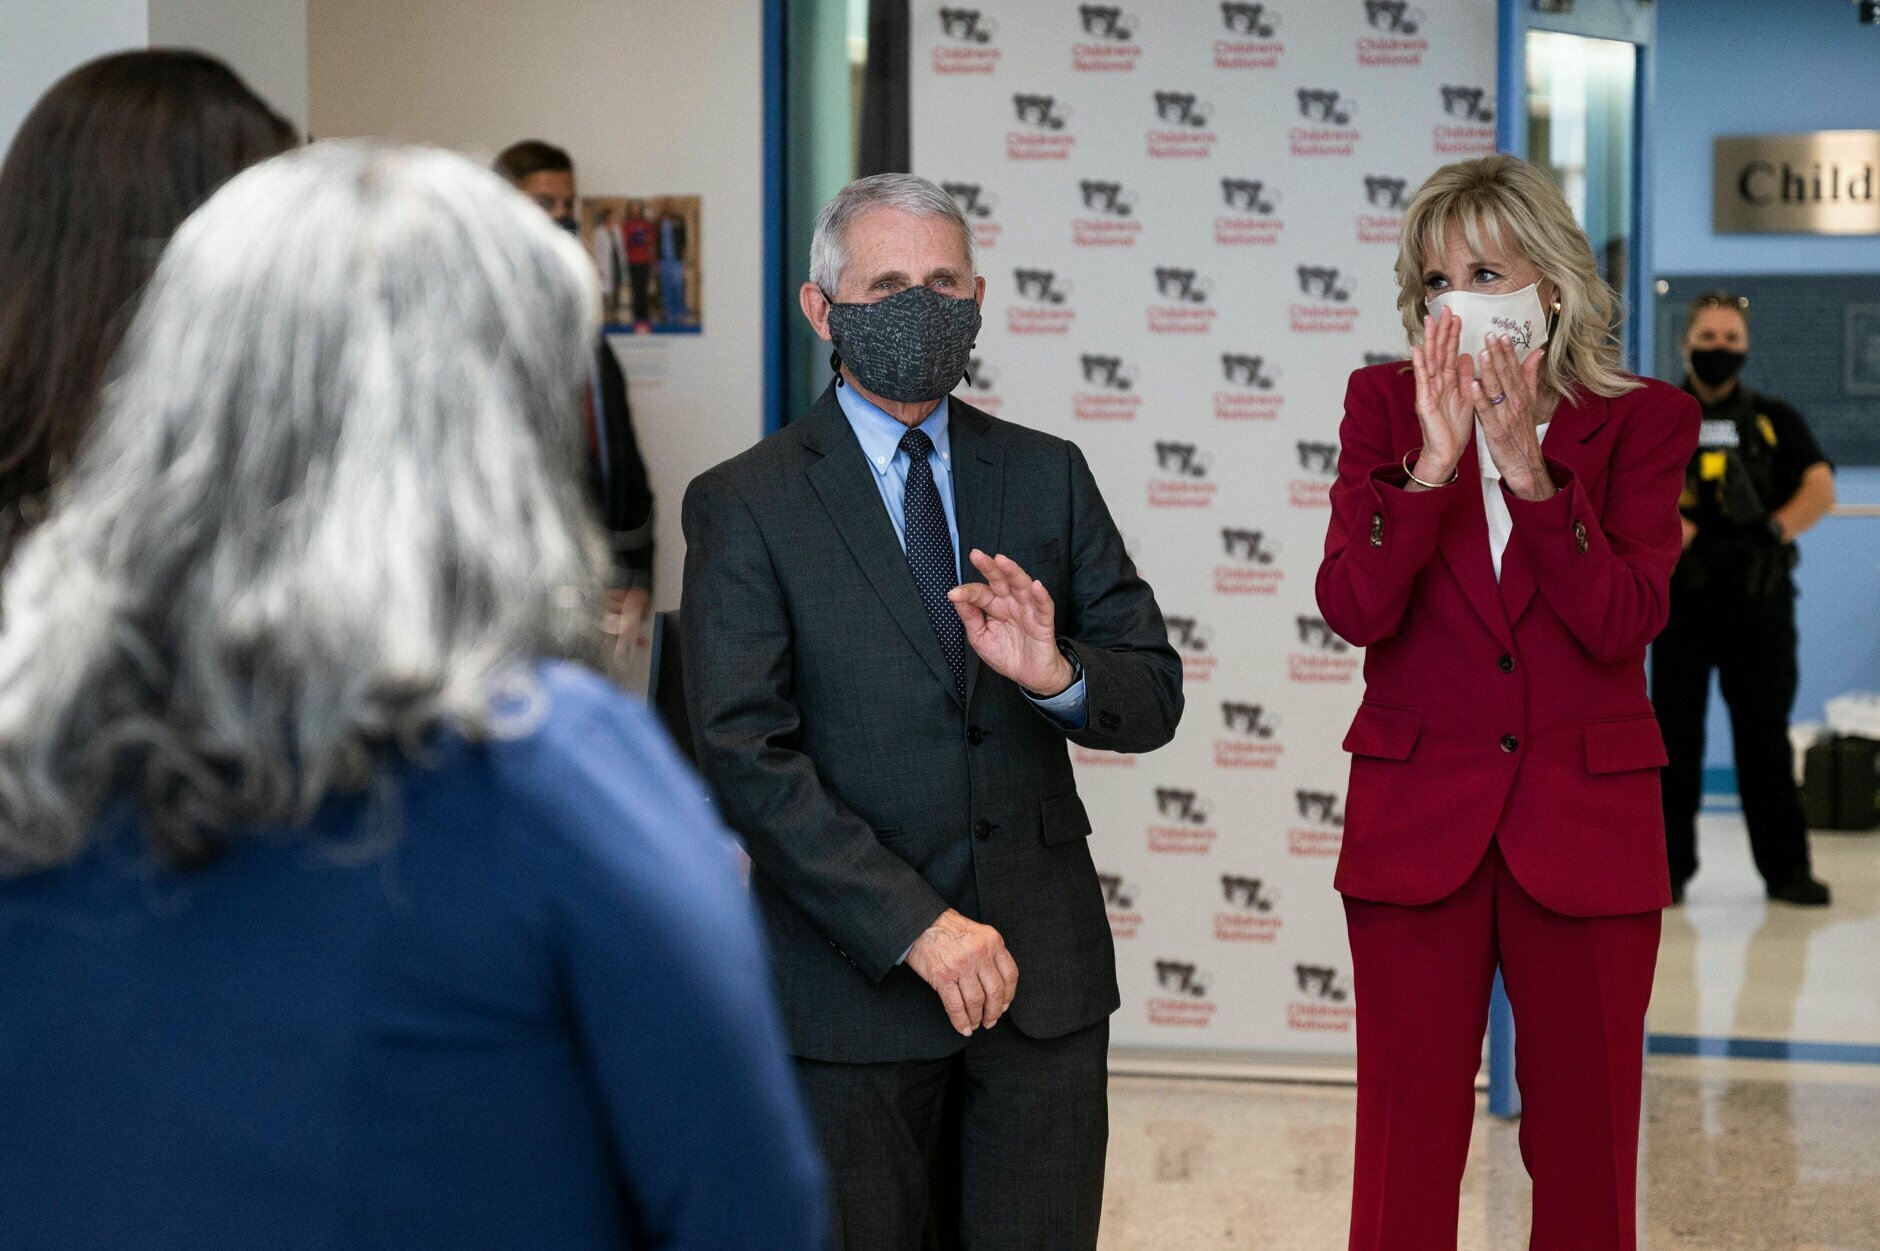 Dr. Anthony Fauci (C) waves as US First Lady Jill Biden (R) introduces him as an American Hero as they tour the vaccination center at the Children's National Hospital in Washington, DC on May 20, 2021. (Photo by JIM WATSON / AFP) (Photo by JIM WATSON/AFP via Getty Images)